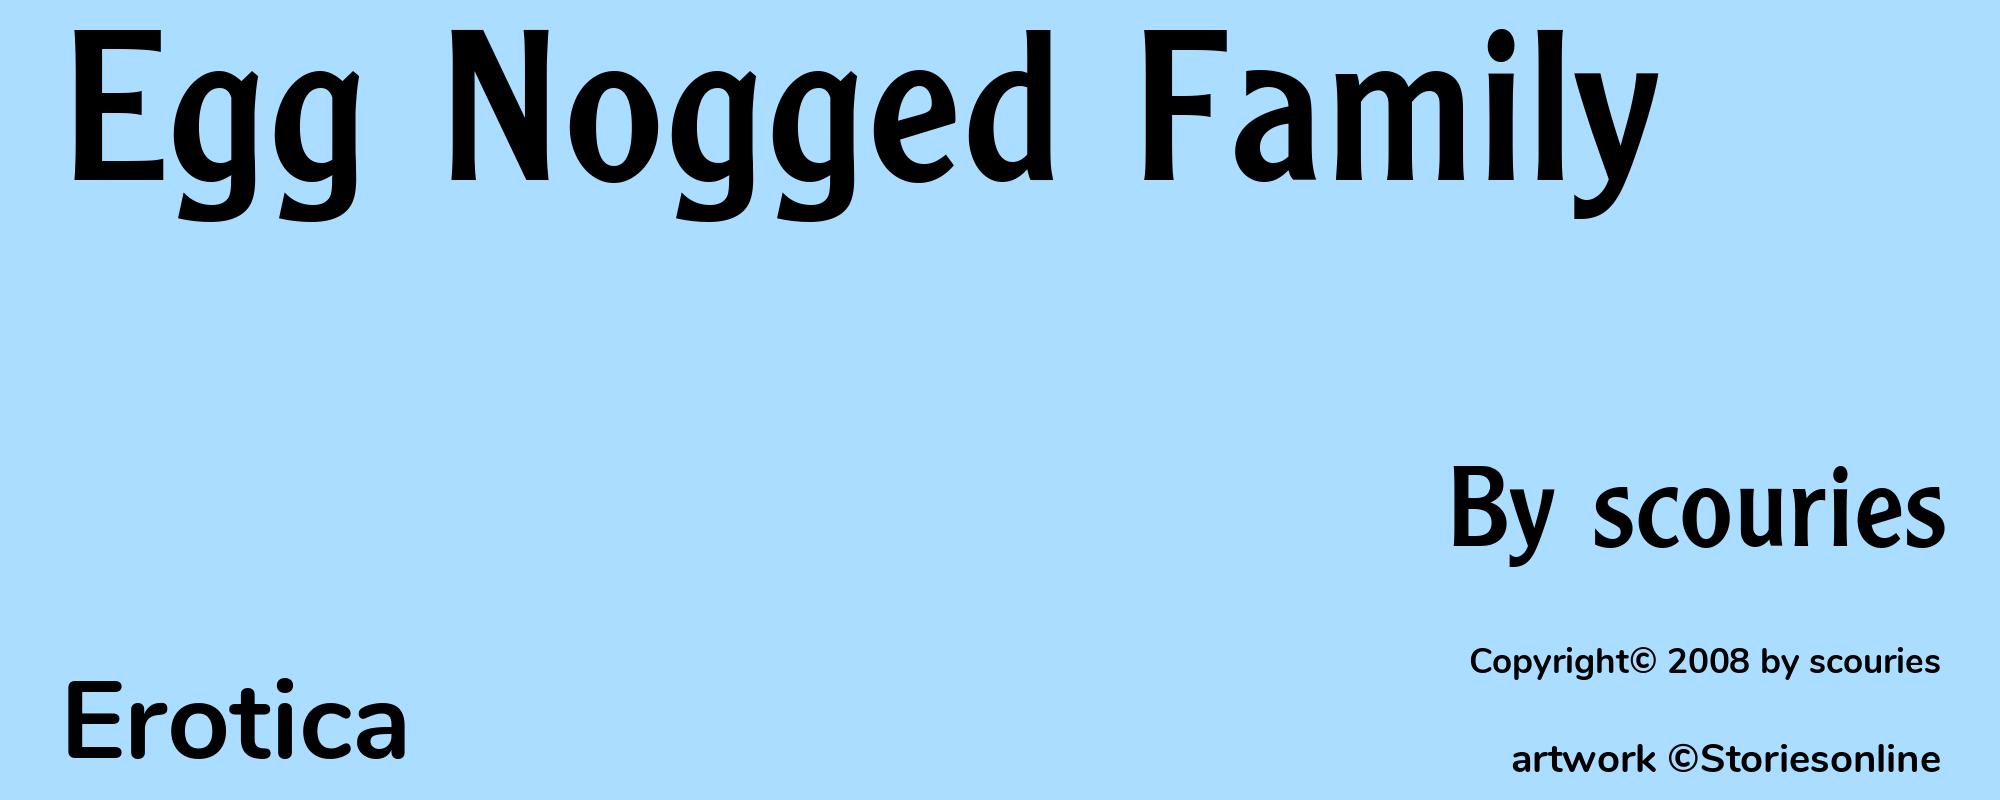 Egg Nogged Family - Cover